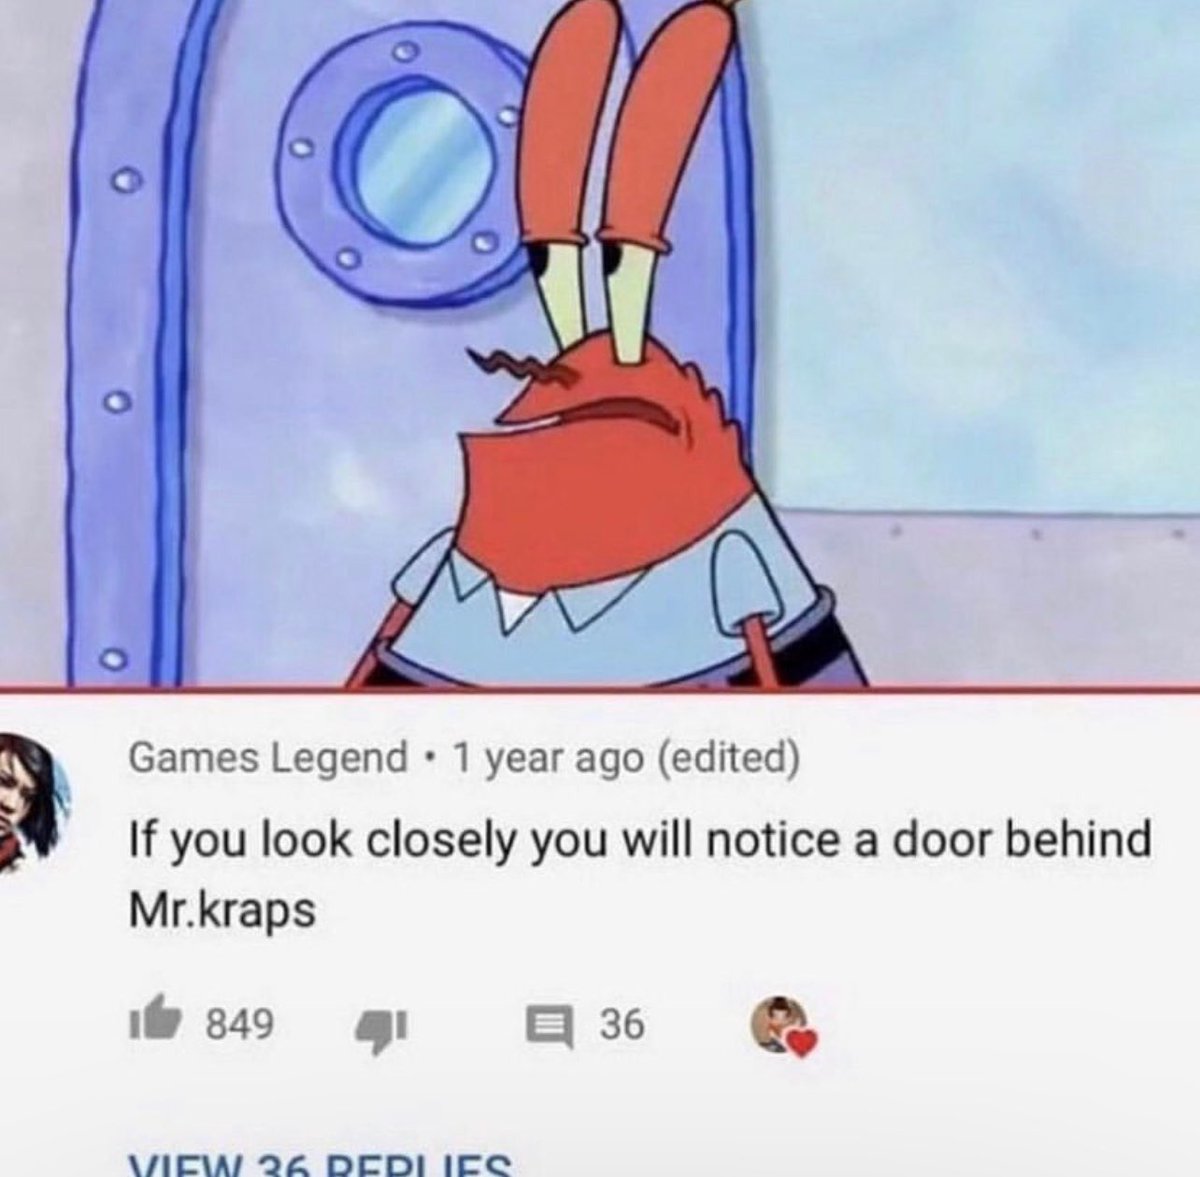 funny and savage youtube comments - cartoon - Games Legend 1 year ago edited If you look closely you will notice a door behind Mr.kraps 849 4 View 36 Replies 36